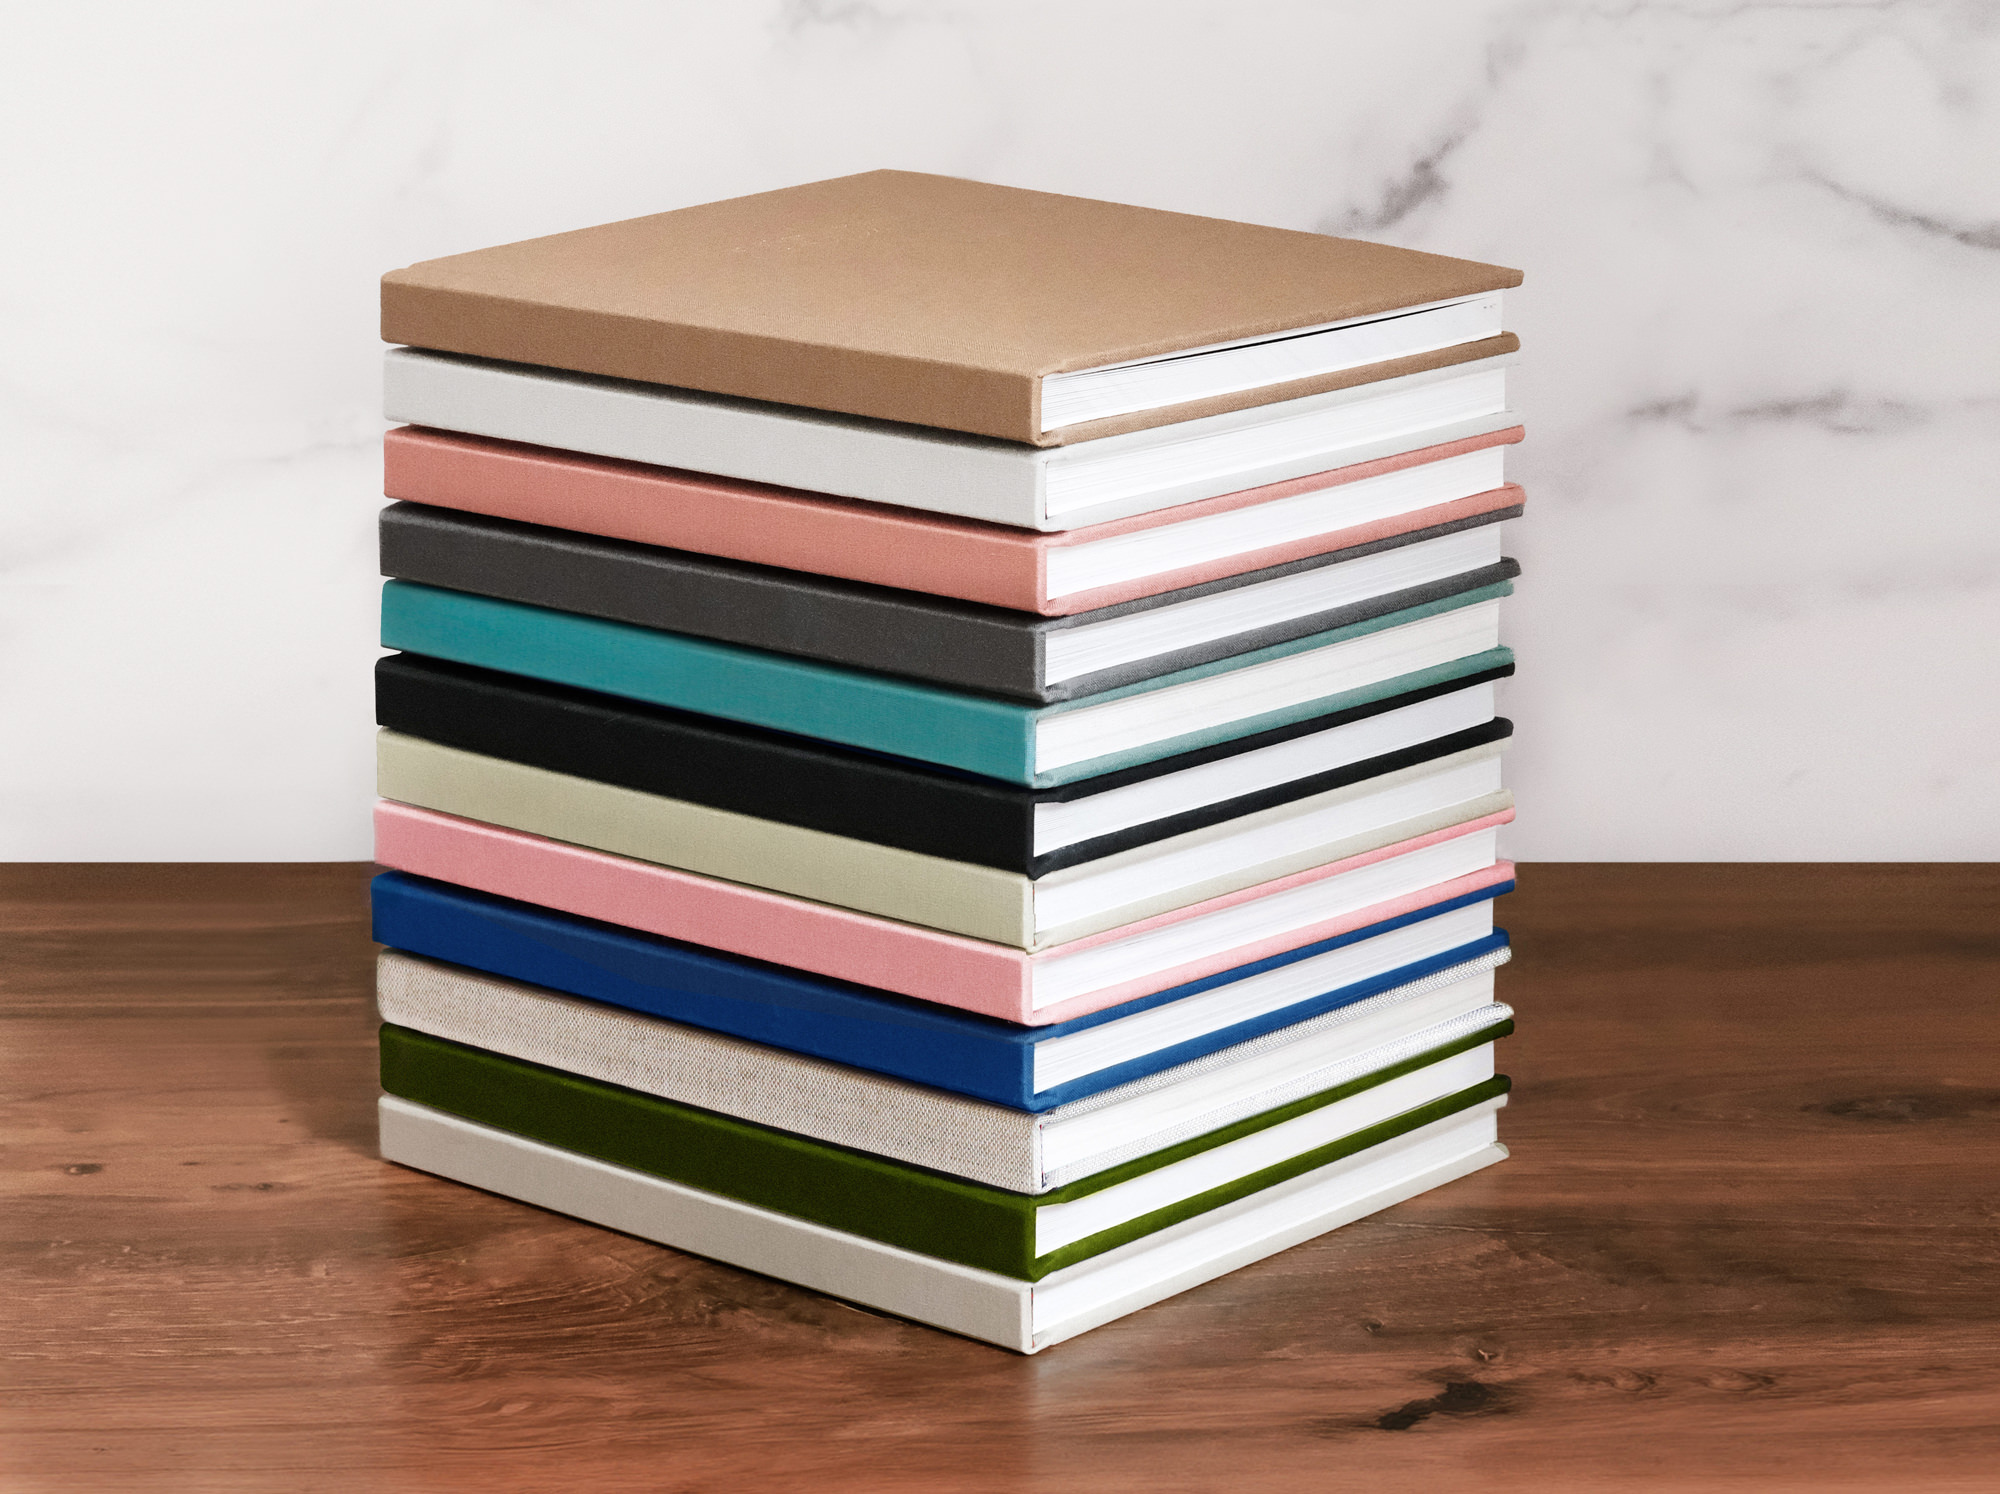 Layflat Photo Albums Crafted in the USA